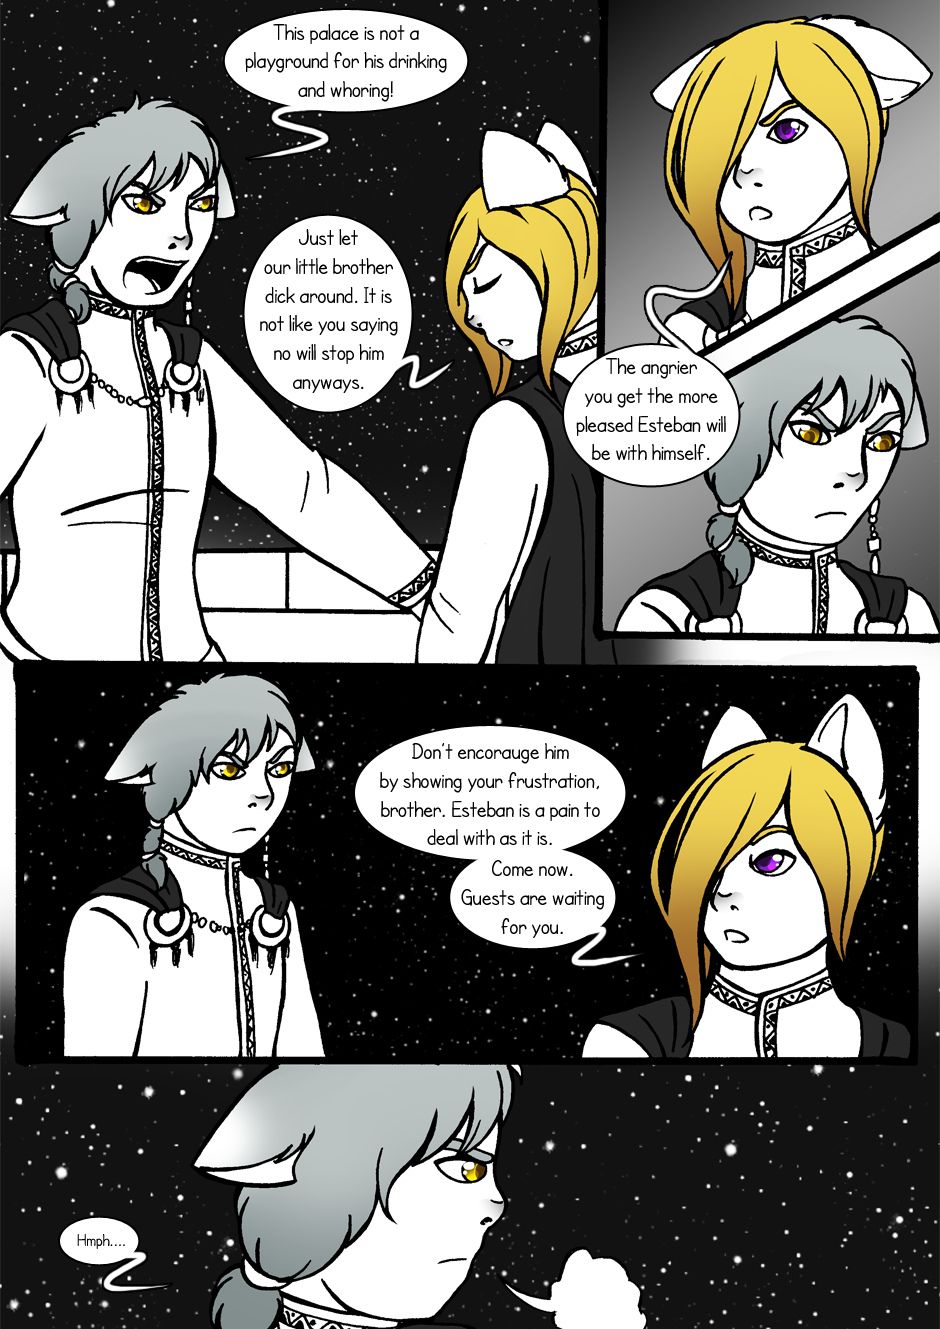 [Jeny-jen94] Between Kings and Queens [Ongoing] 14